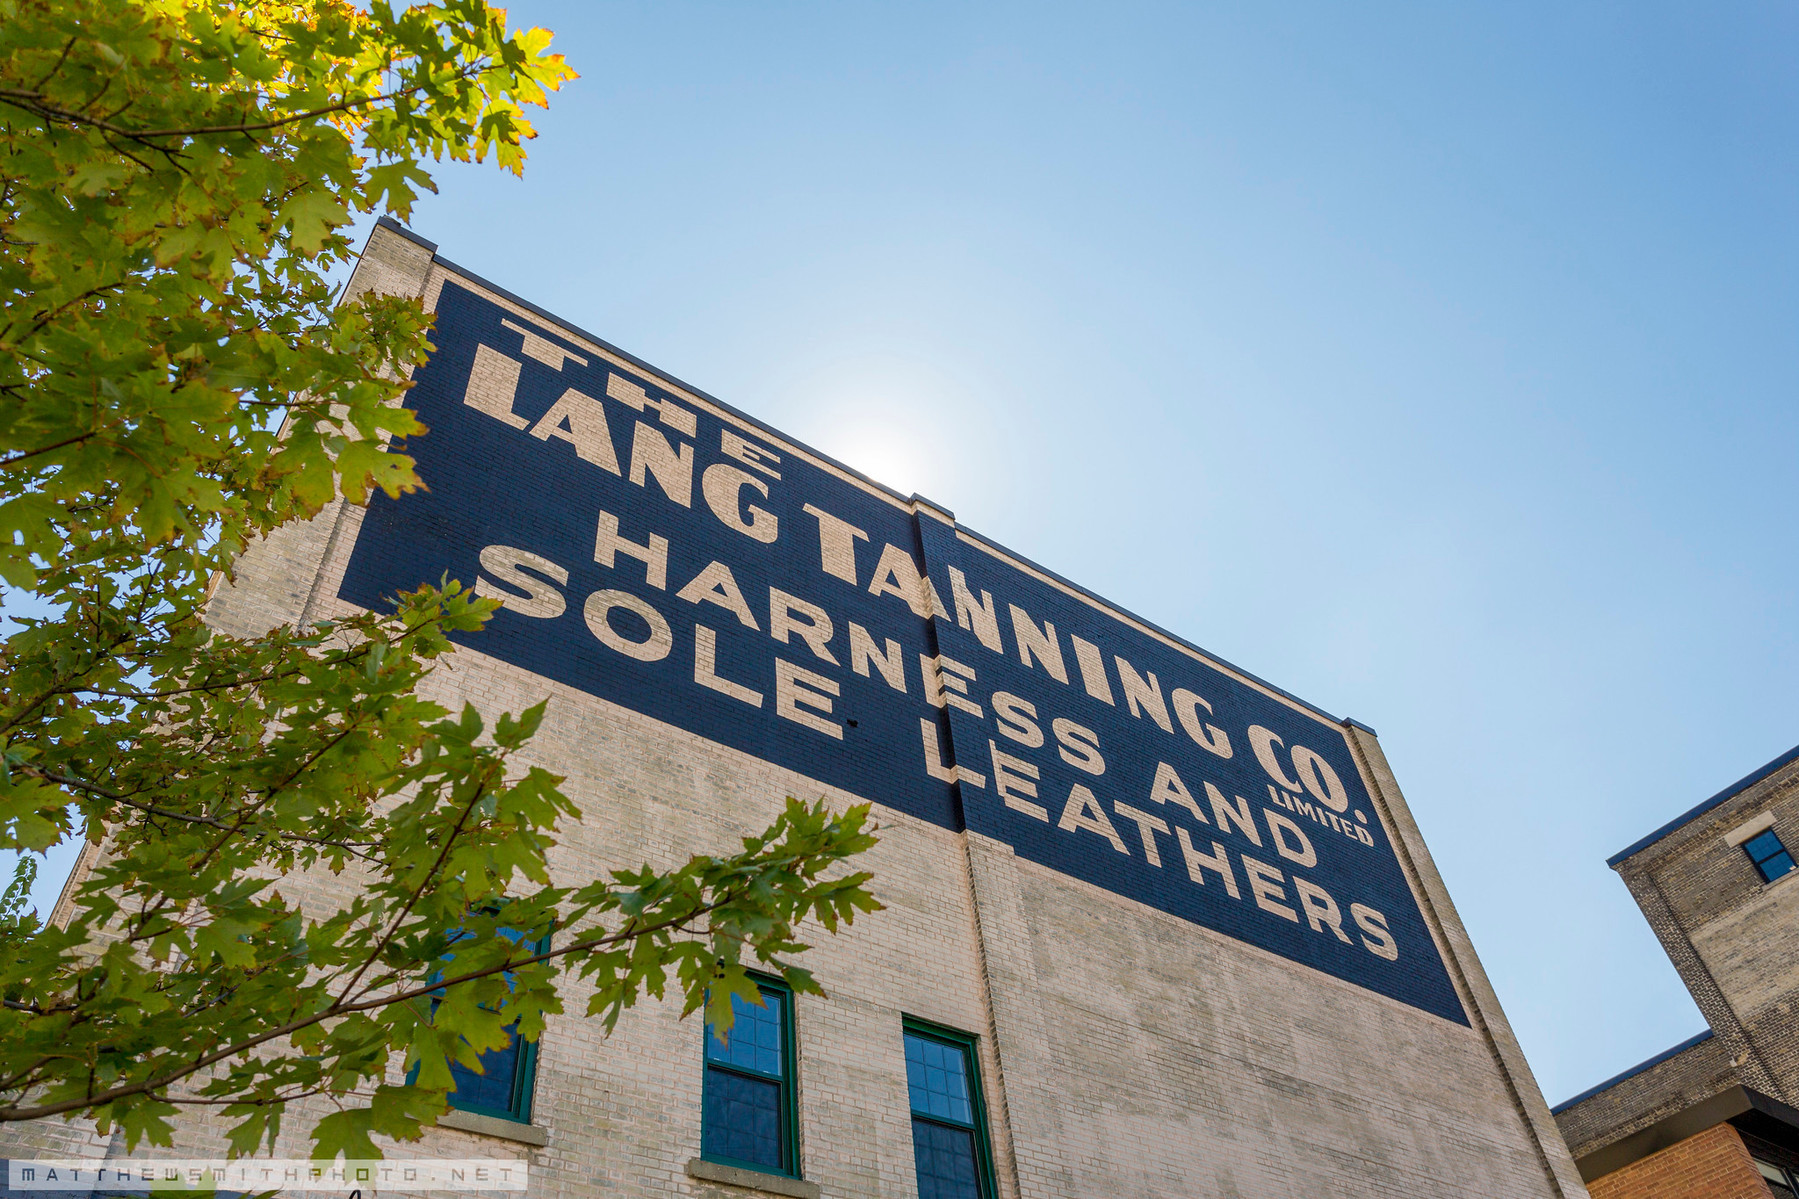 Lang Tannery and Communitech Technology Hub in Kitchener